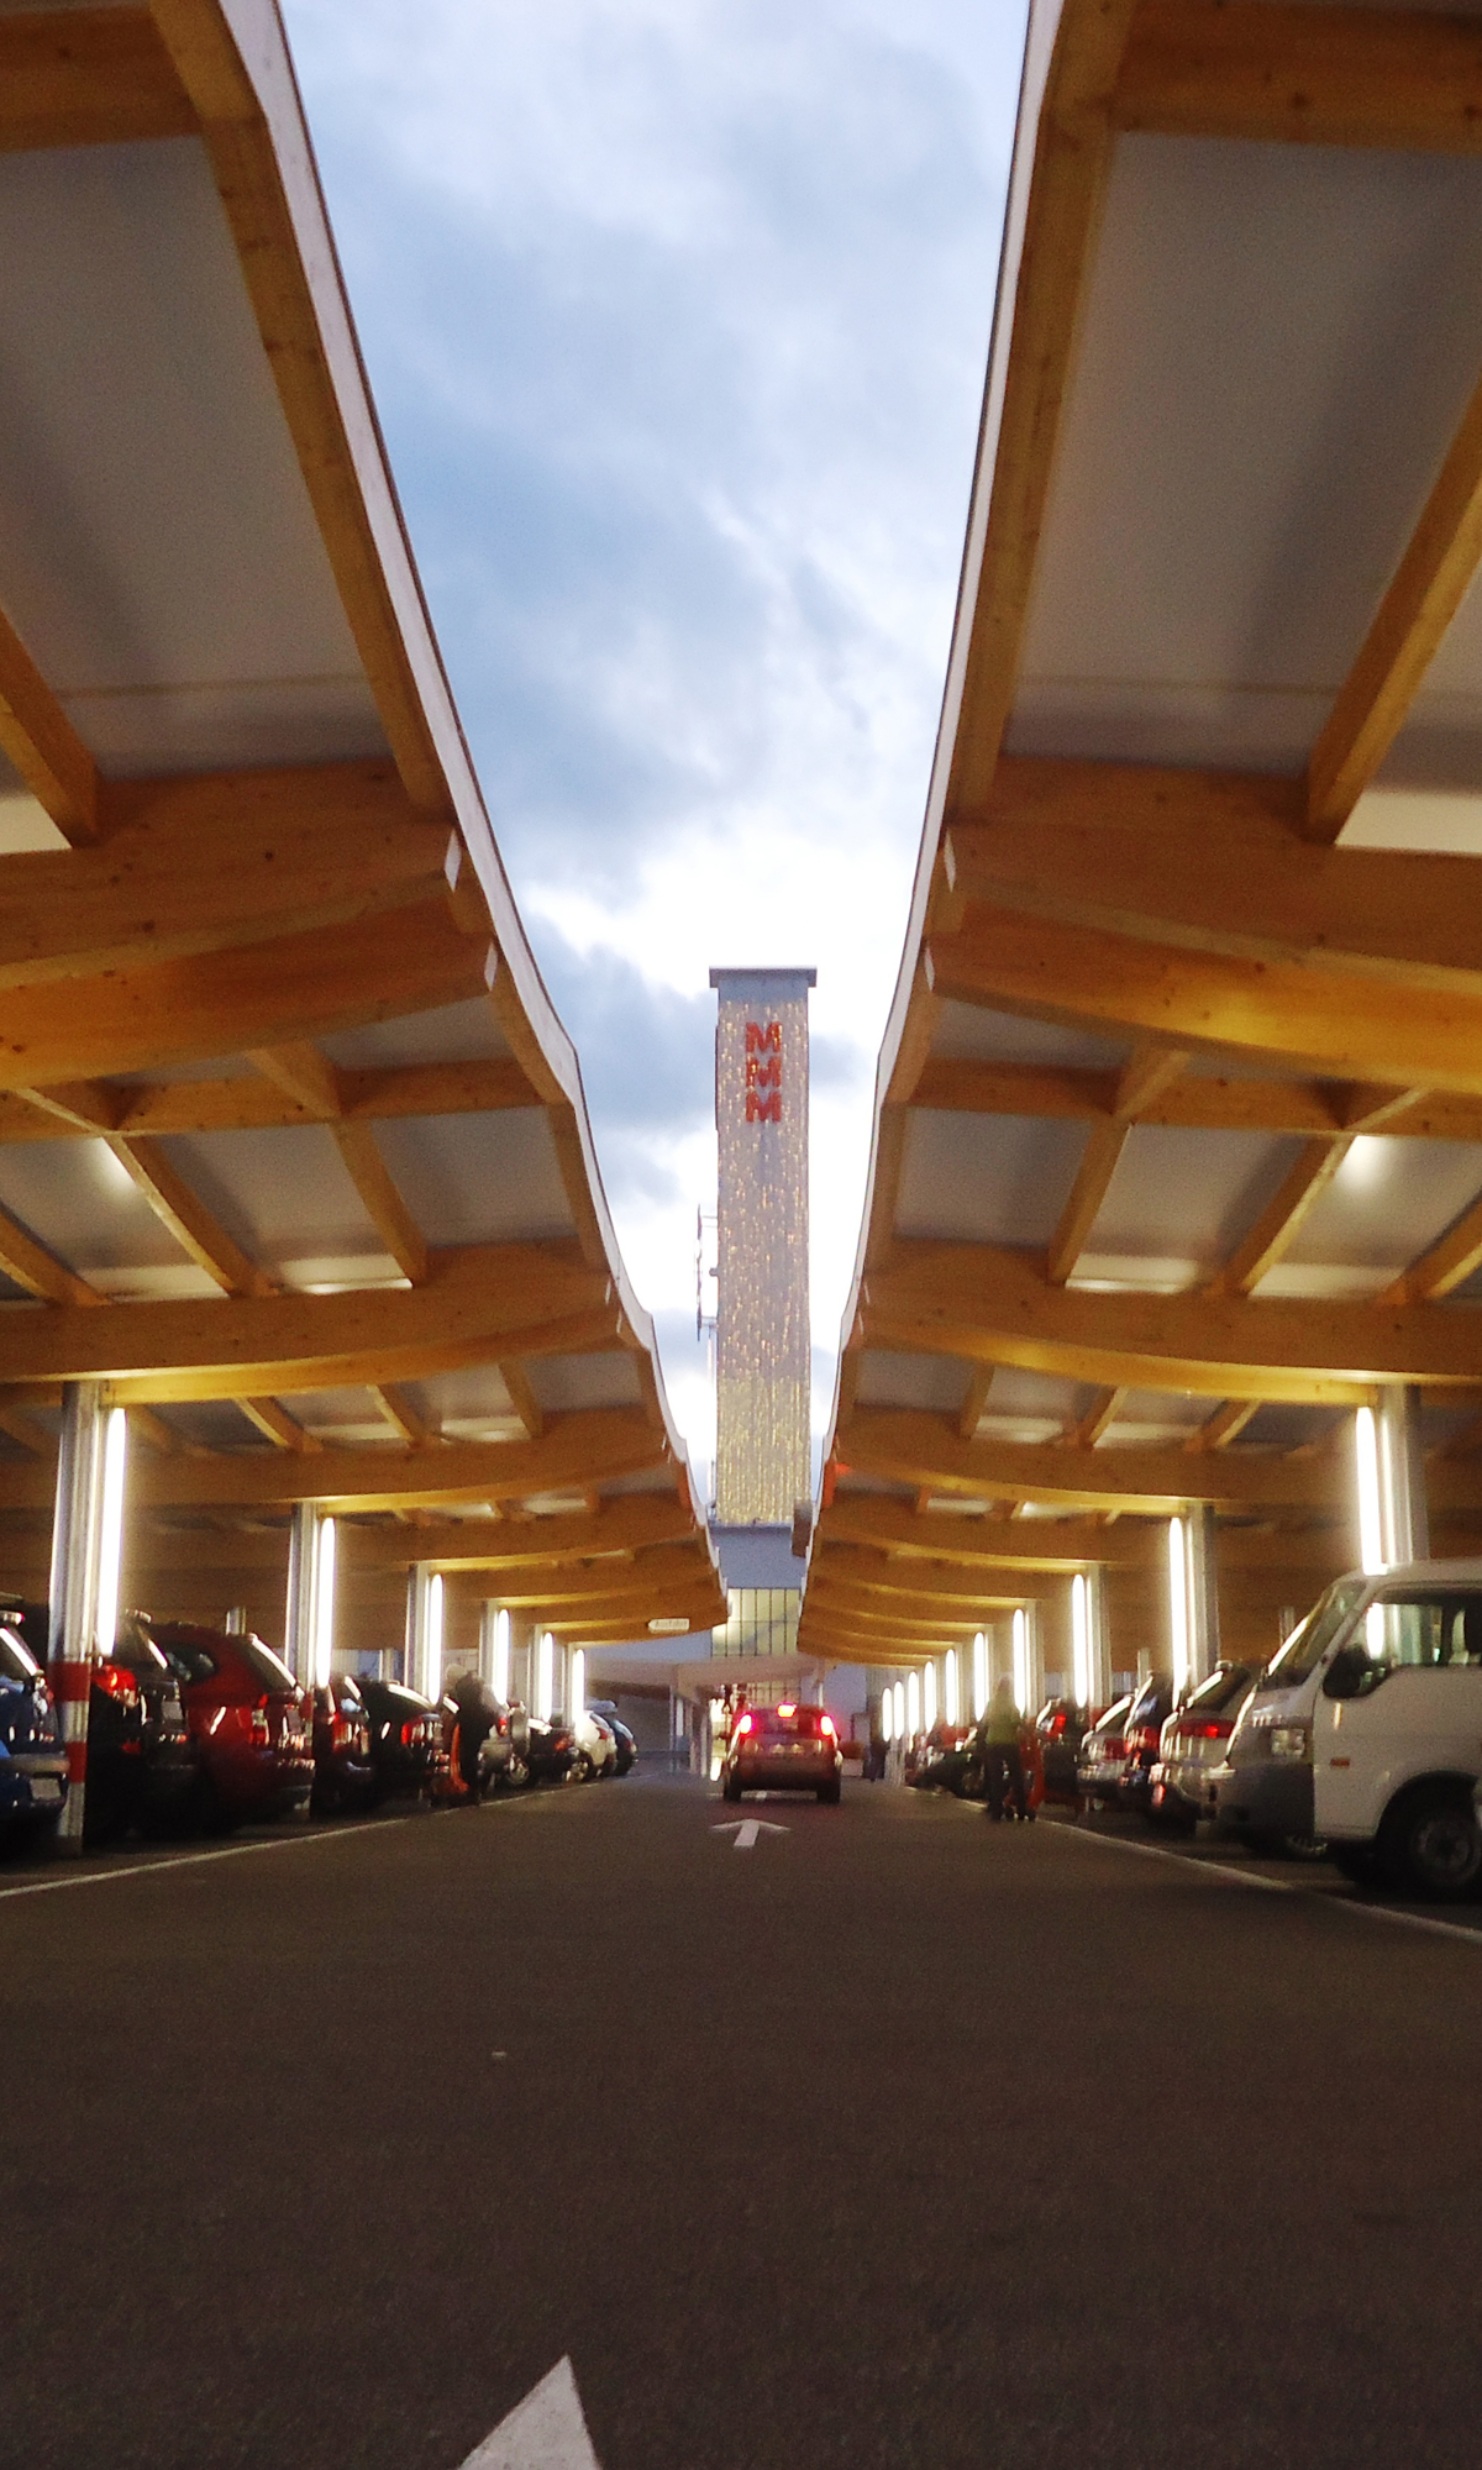 Photograph taken amid the car parking with wooden roofing at the Ladedorf shopping centre